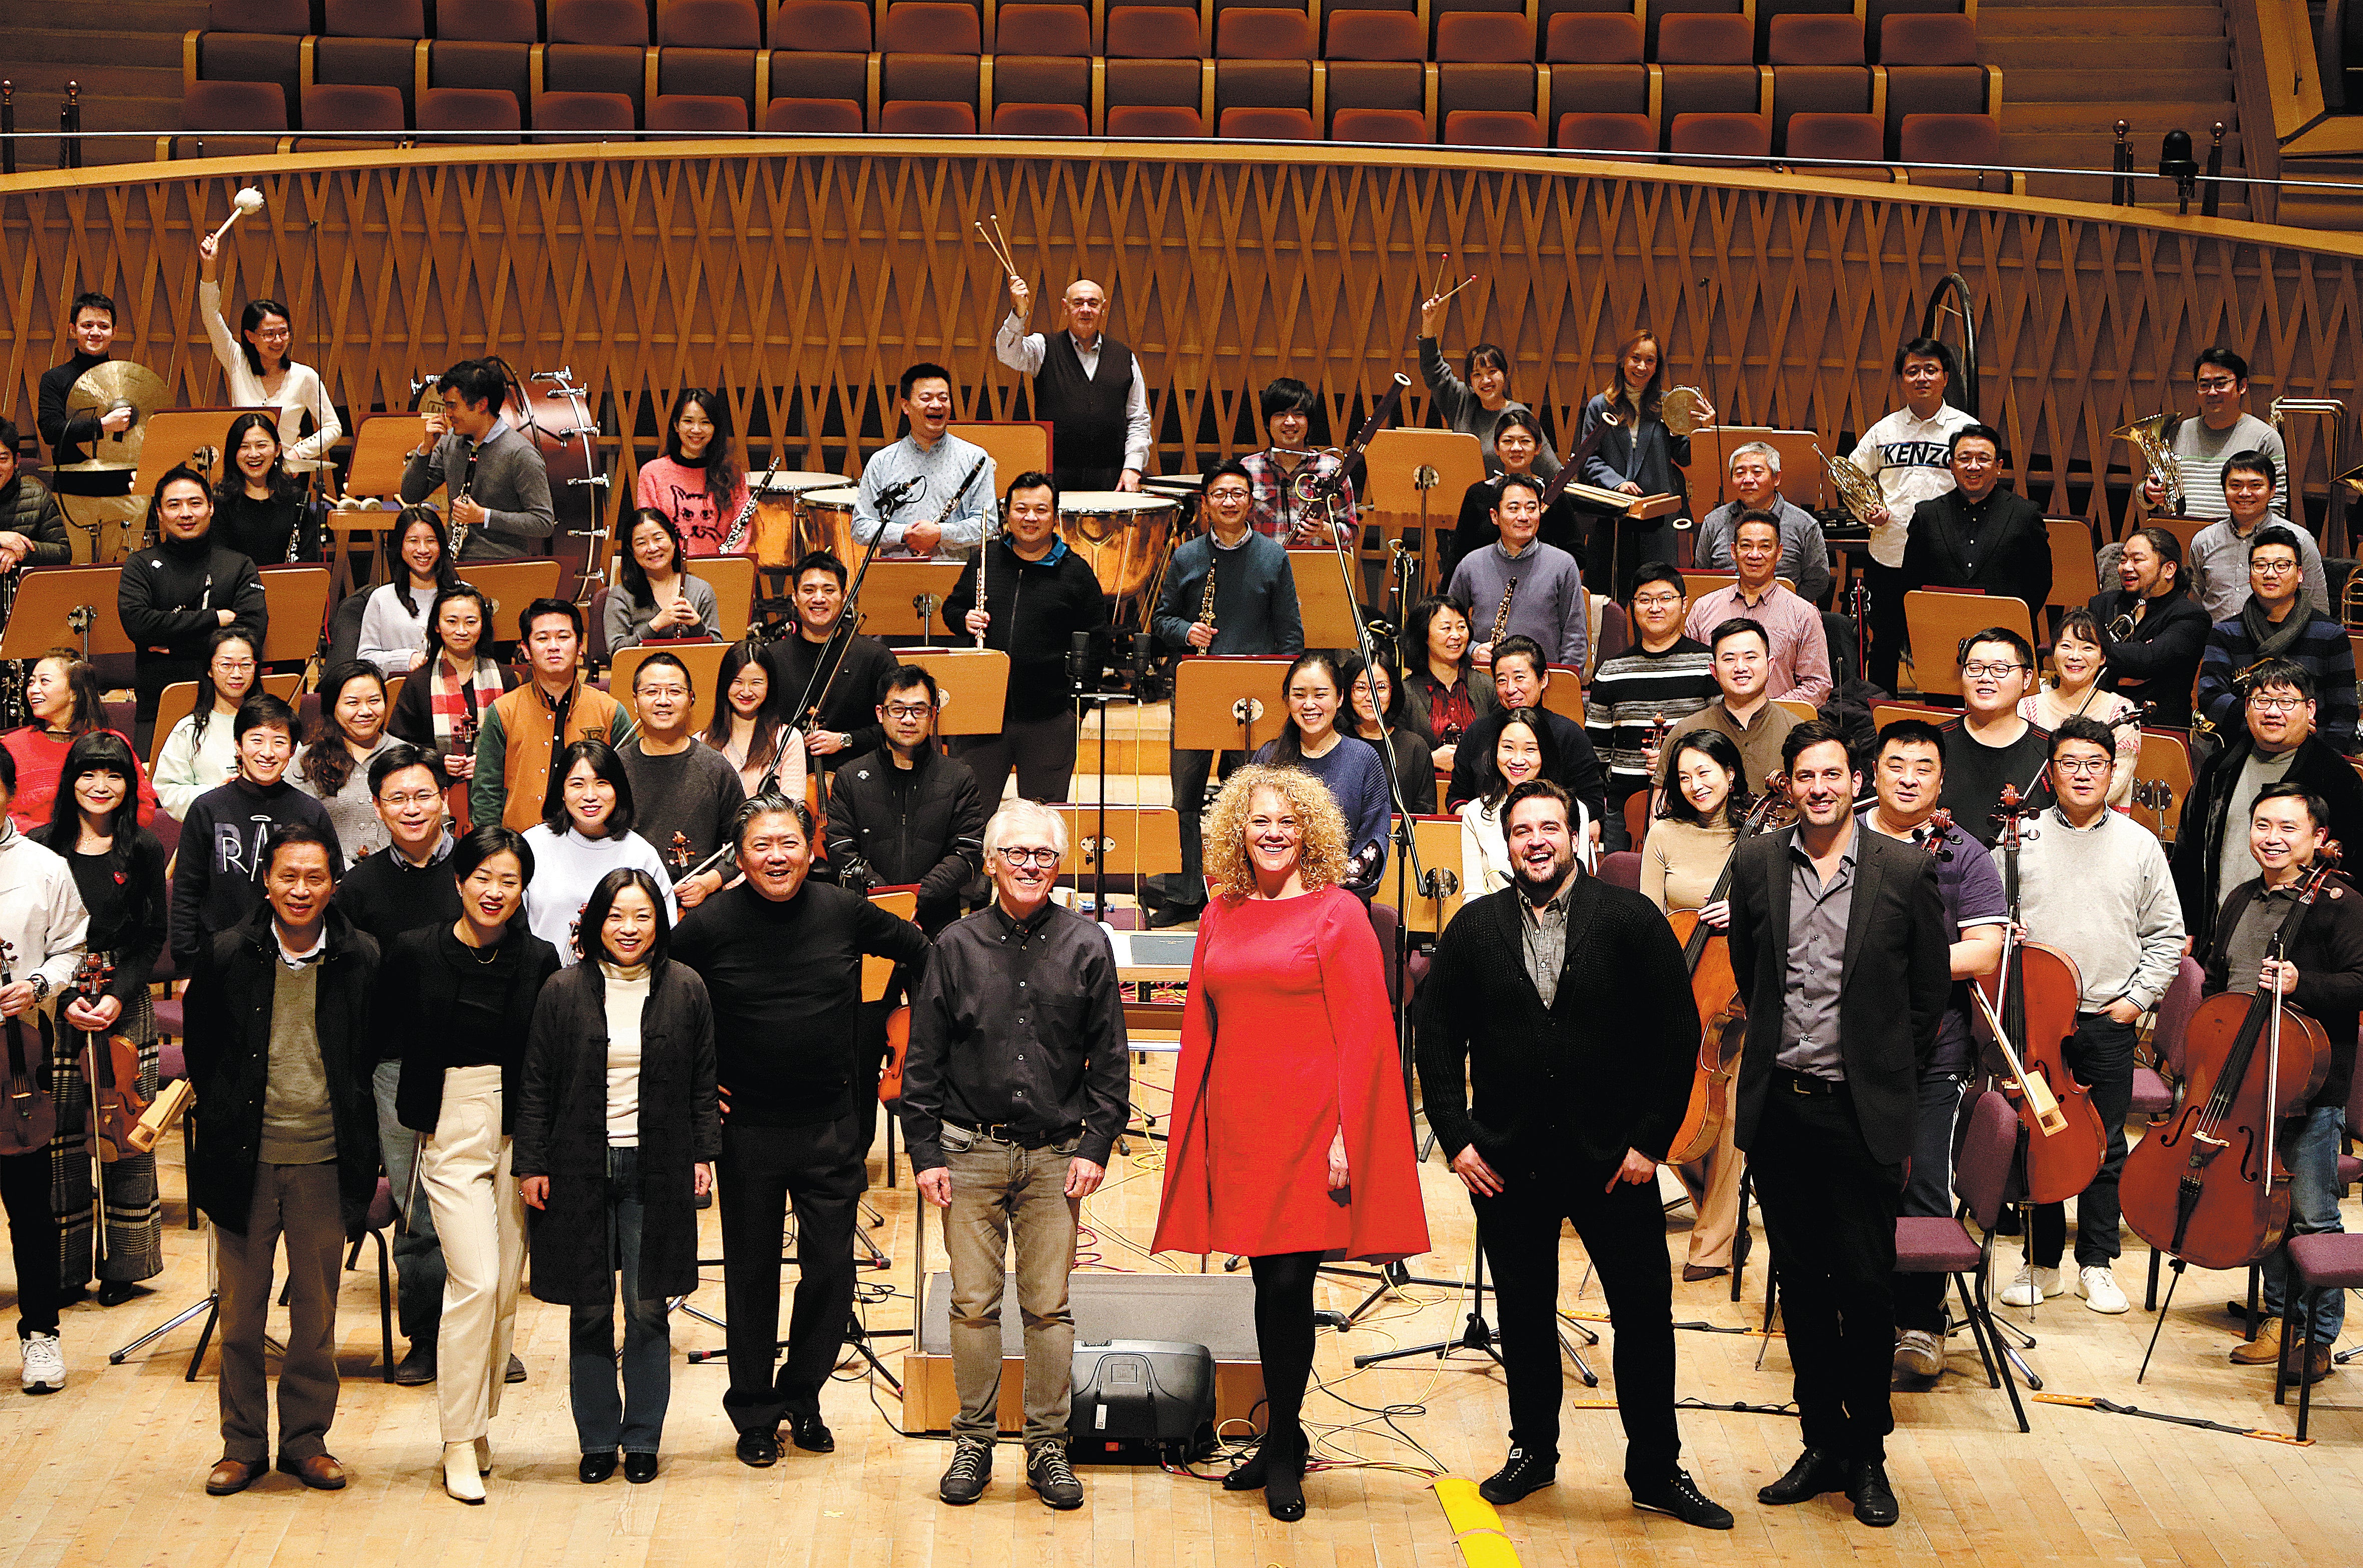 The Shanghai Symphony Orchestra has attracted musicians from around the world